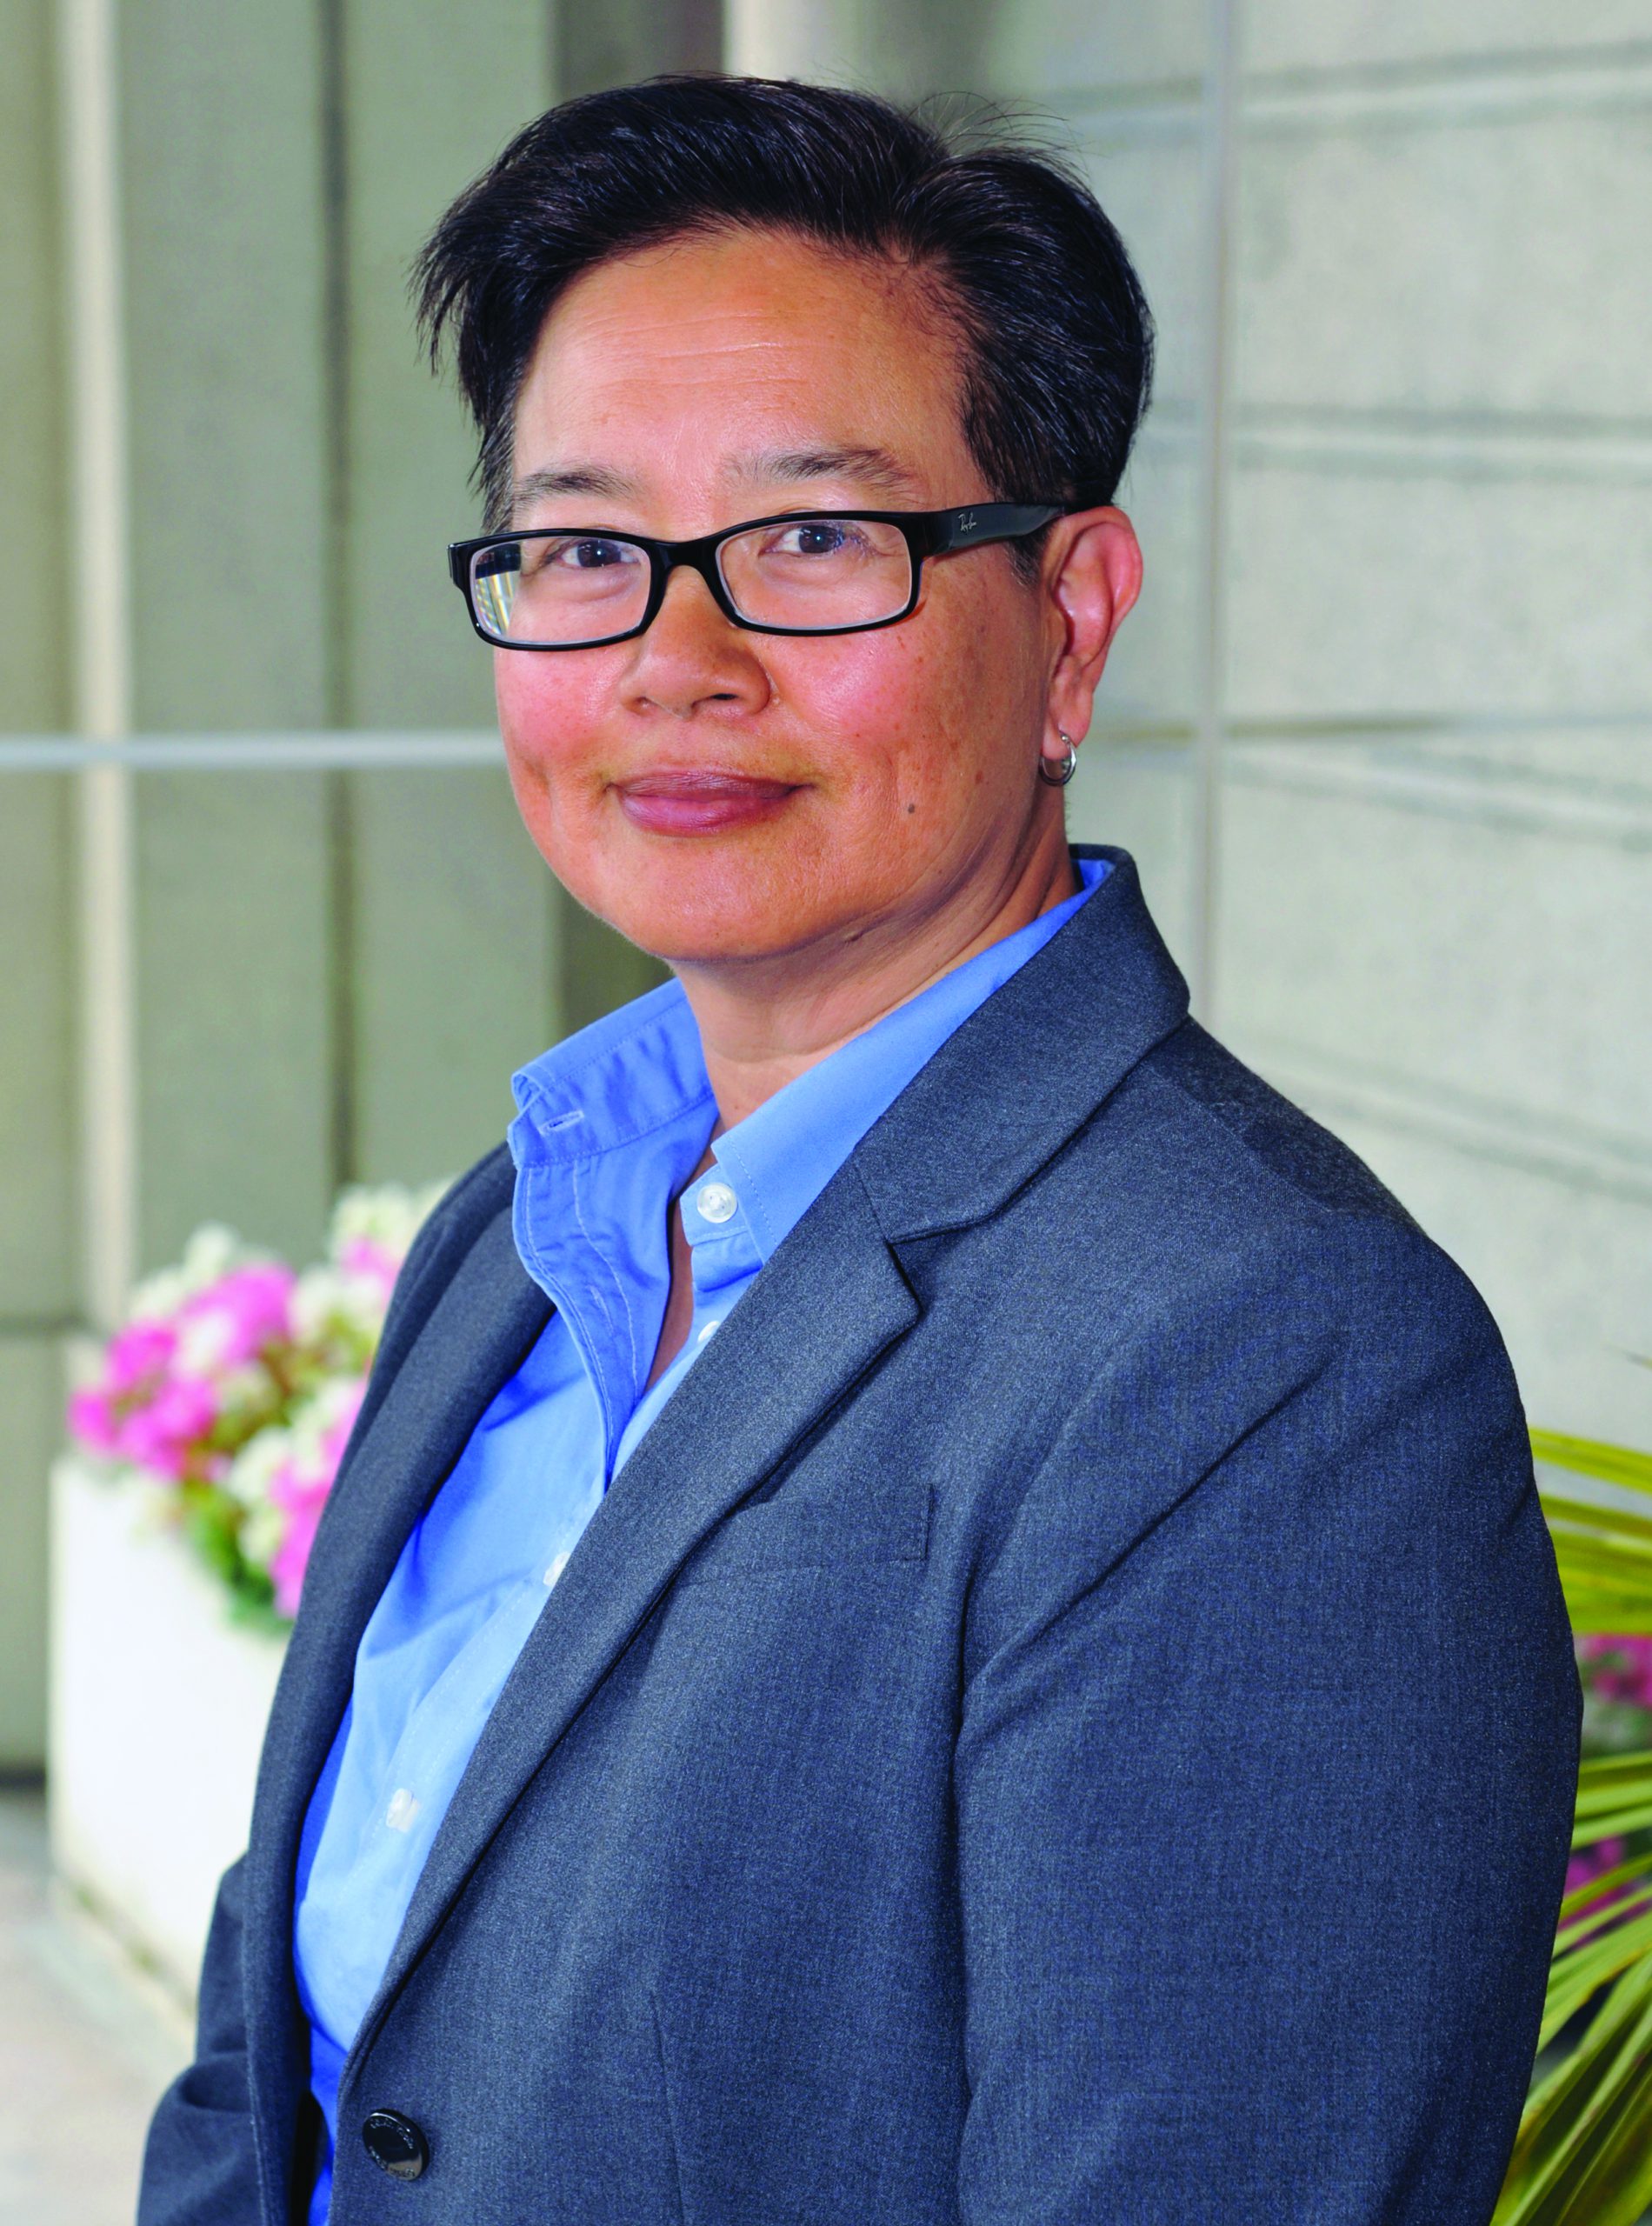 An Asian woman with short black hair stands in a blue shirt and suit jacket.